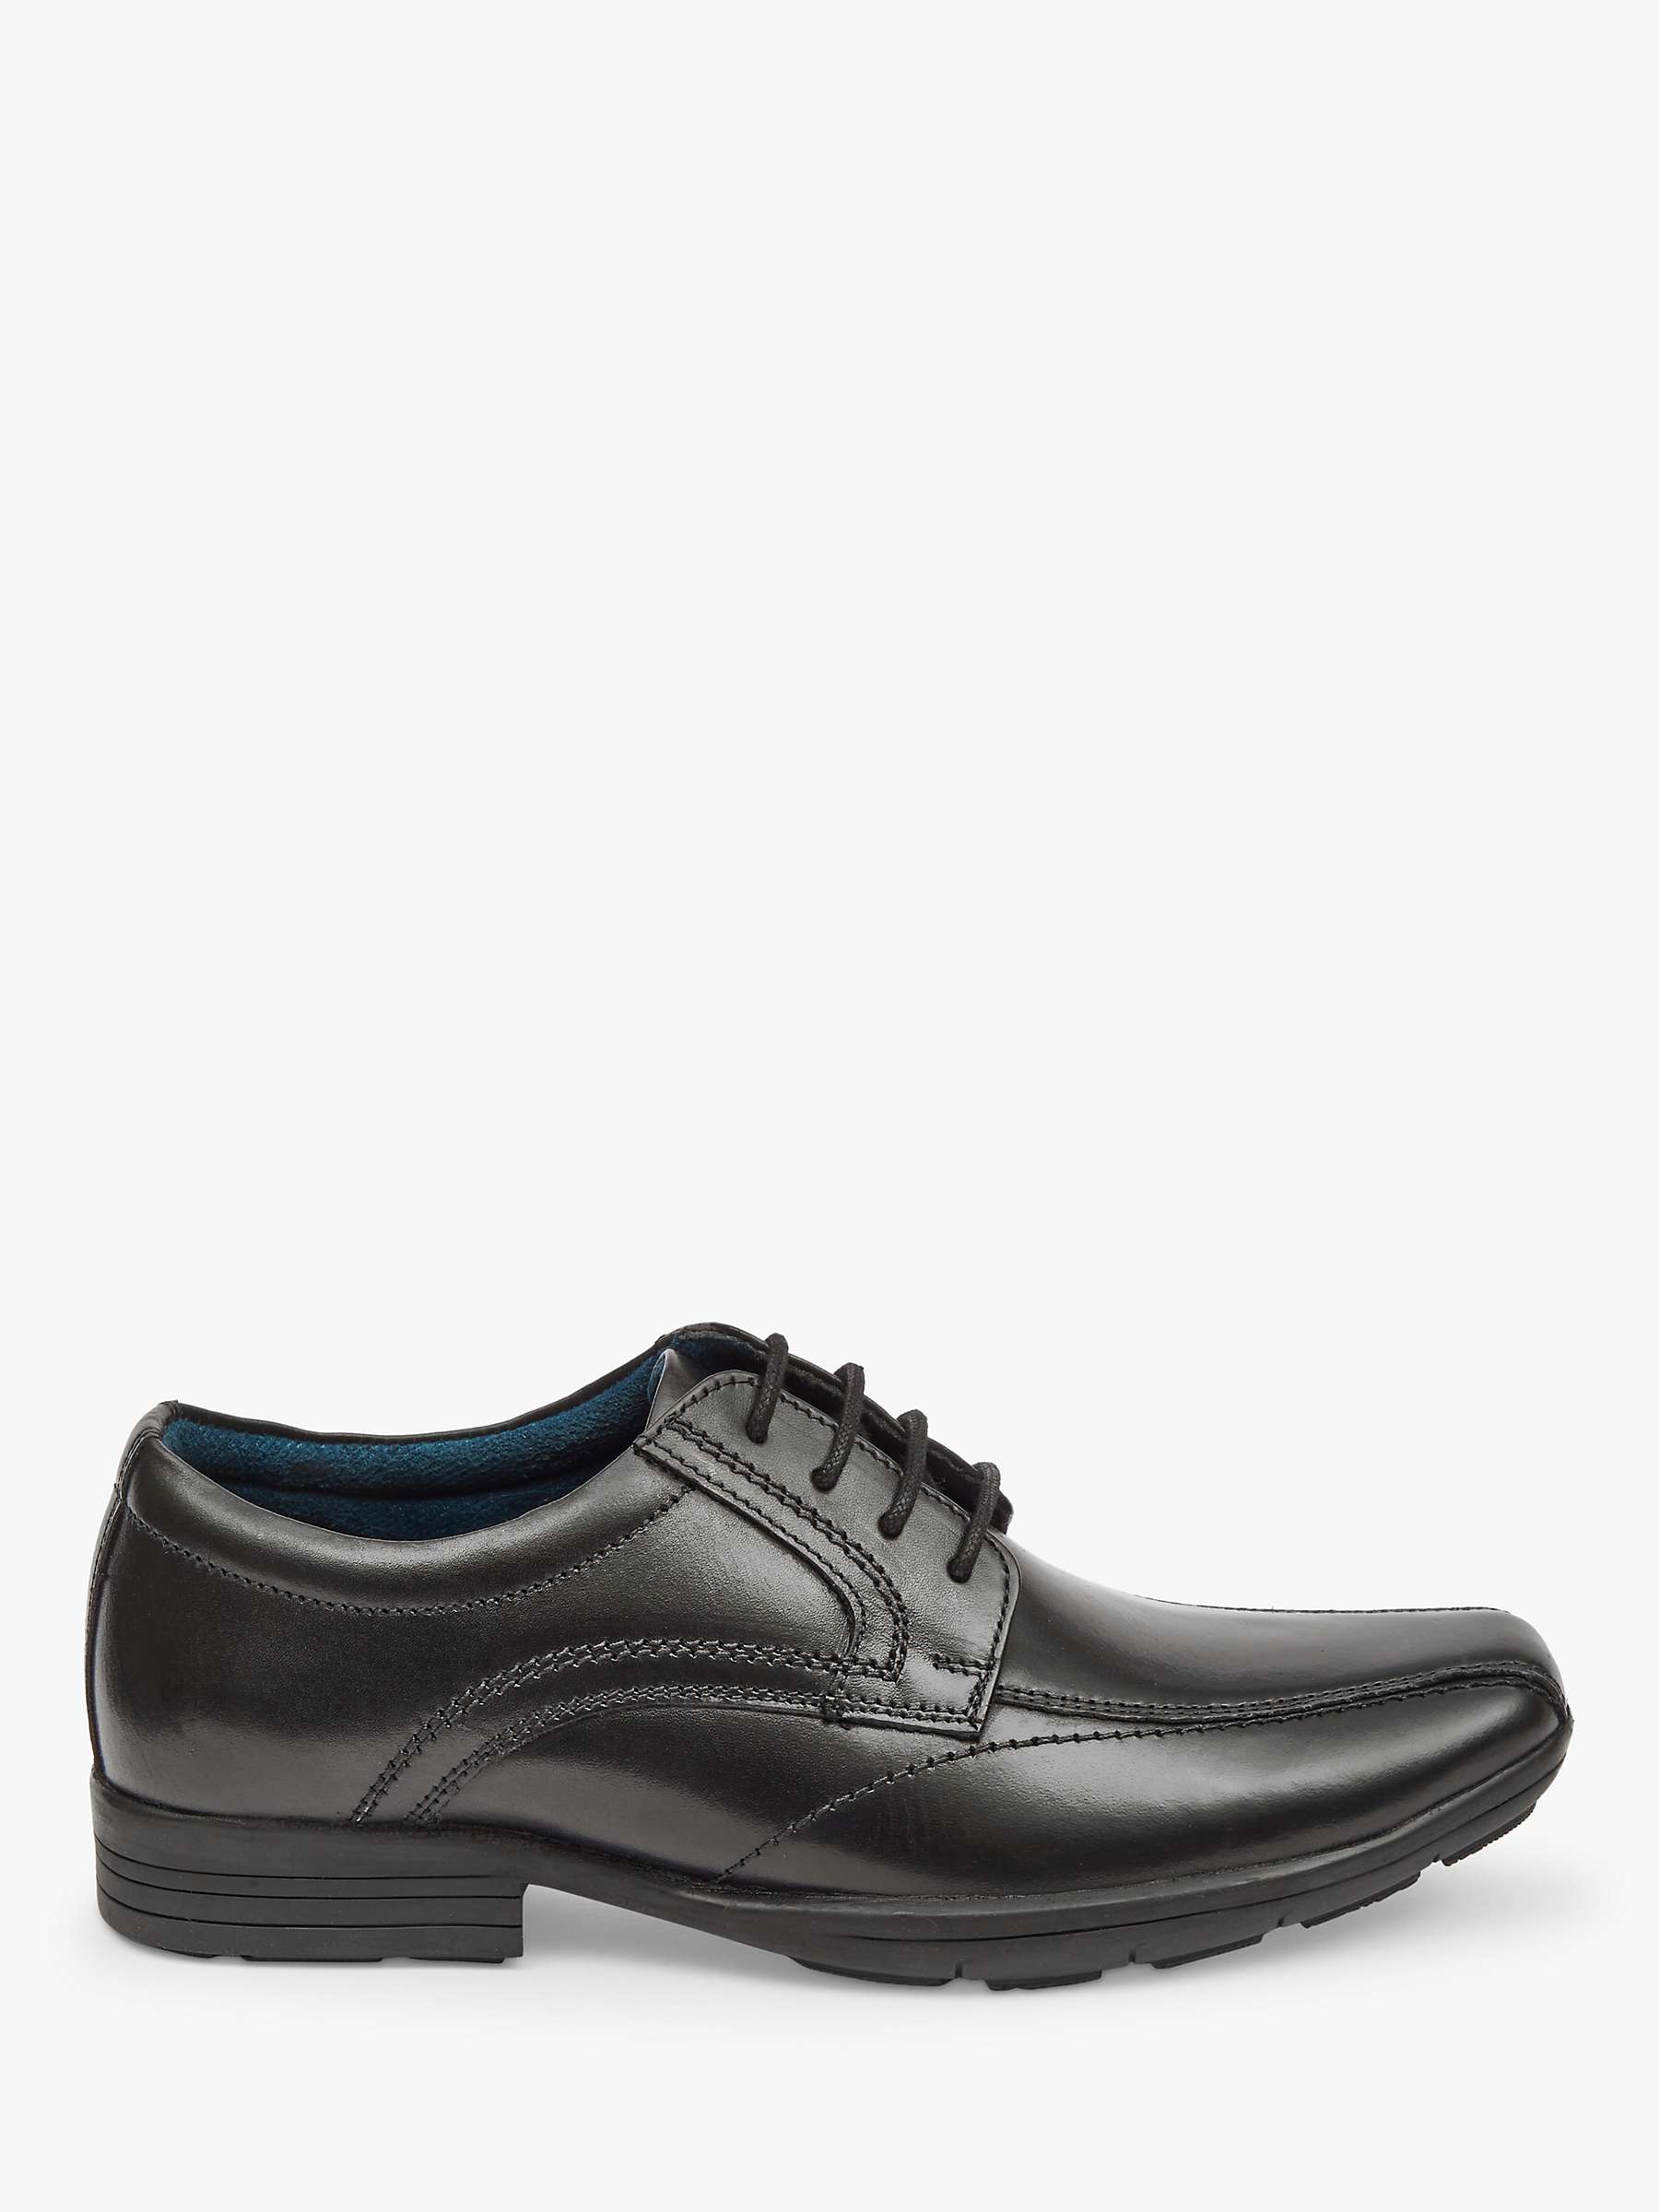 Buy Pod Kids' Angus Leather Shoes, Black Online at johnlewis.com